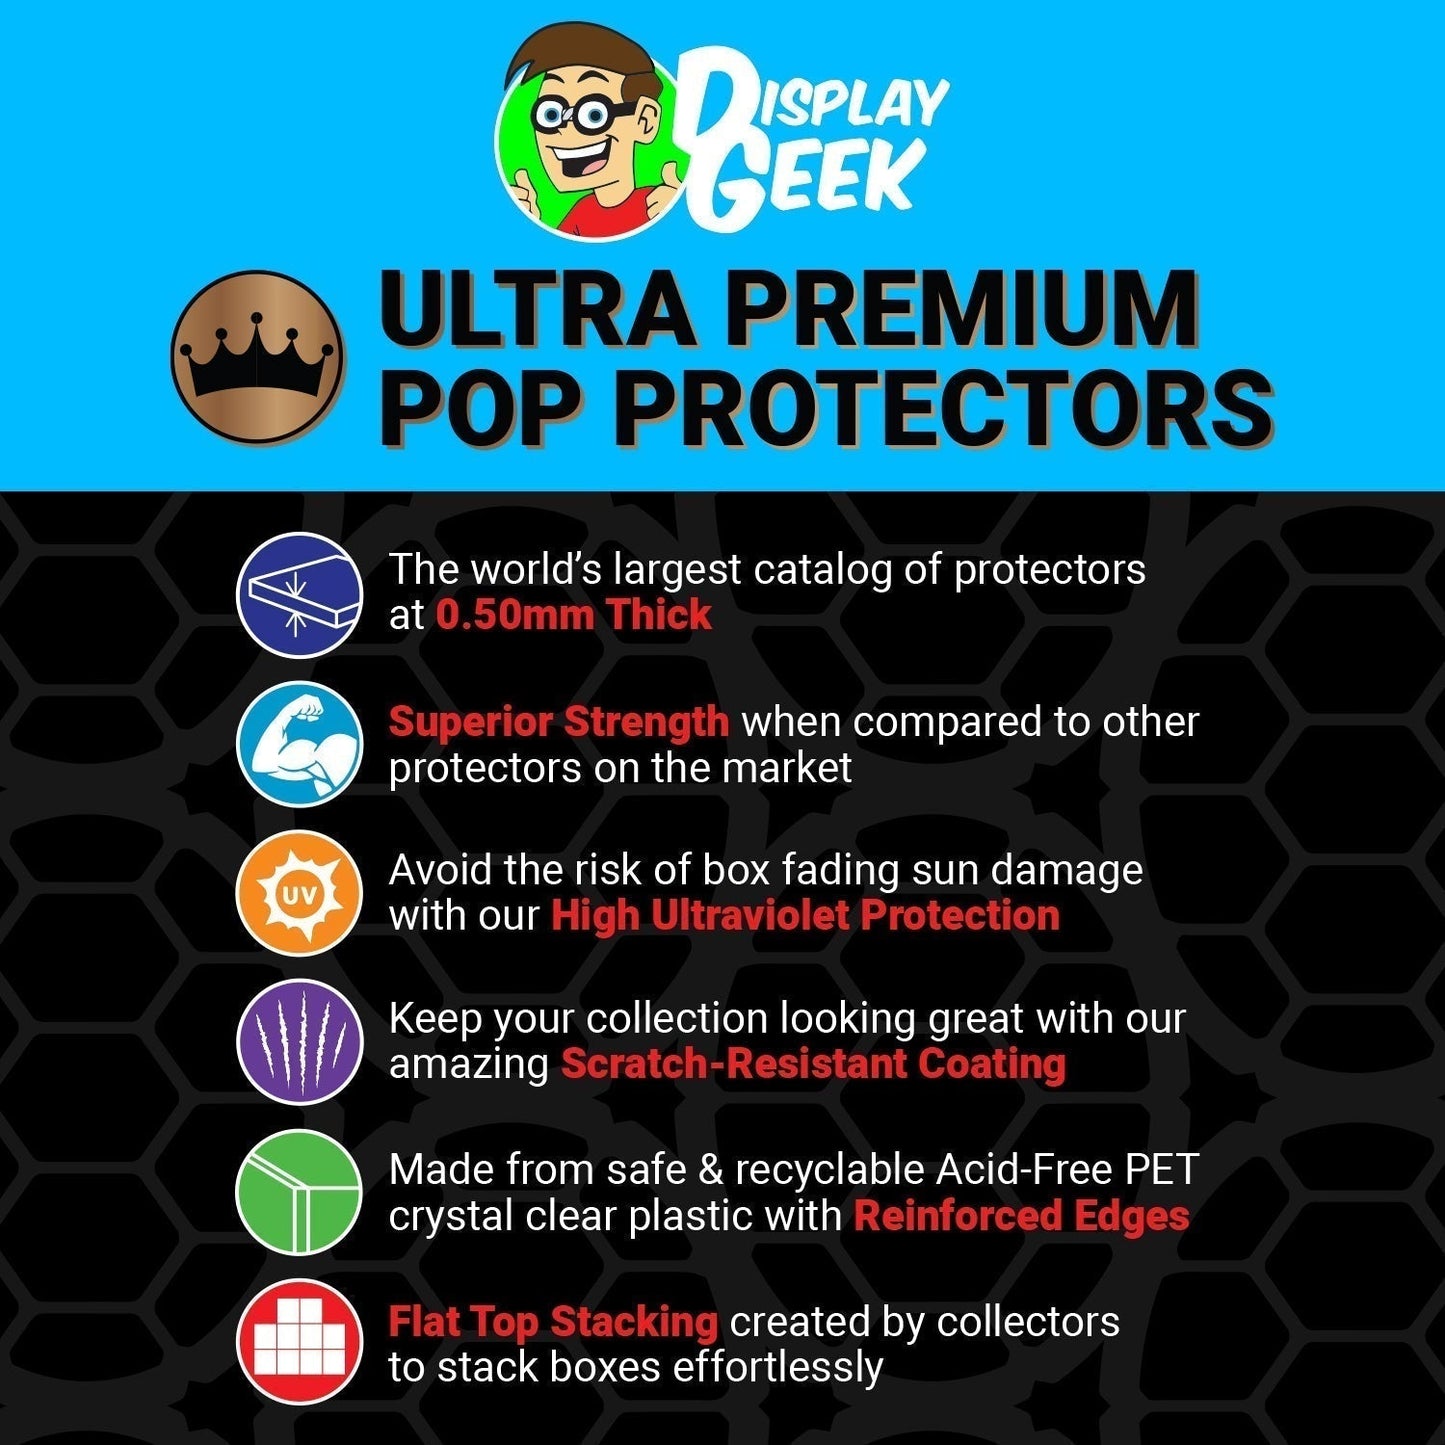 Pop Protector for Hakuna Matata #1313 Funko Pop Moment - PPG Pop Protector Guide Search Created by Display Geek